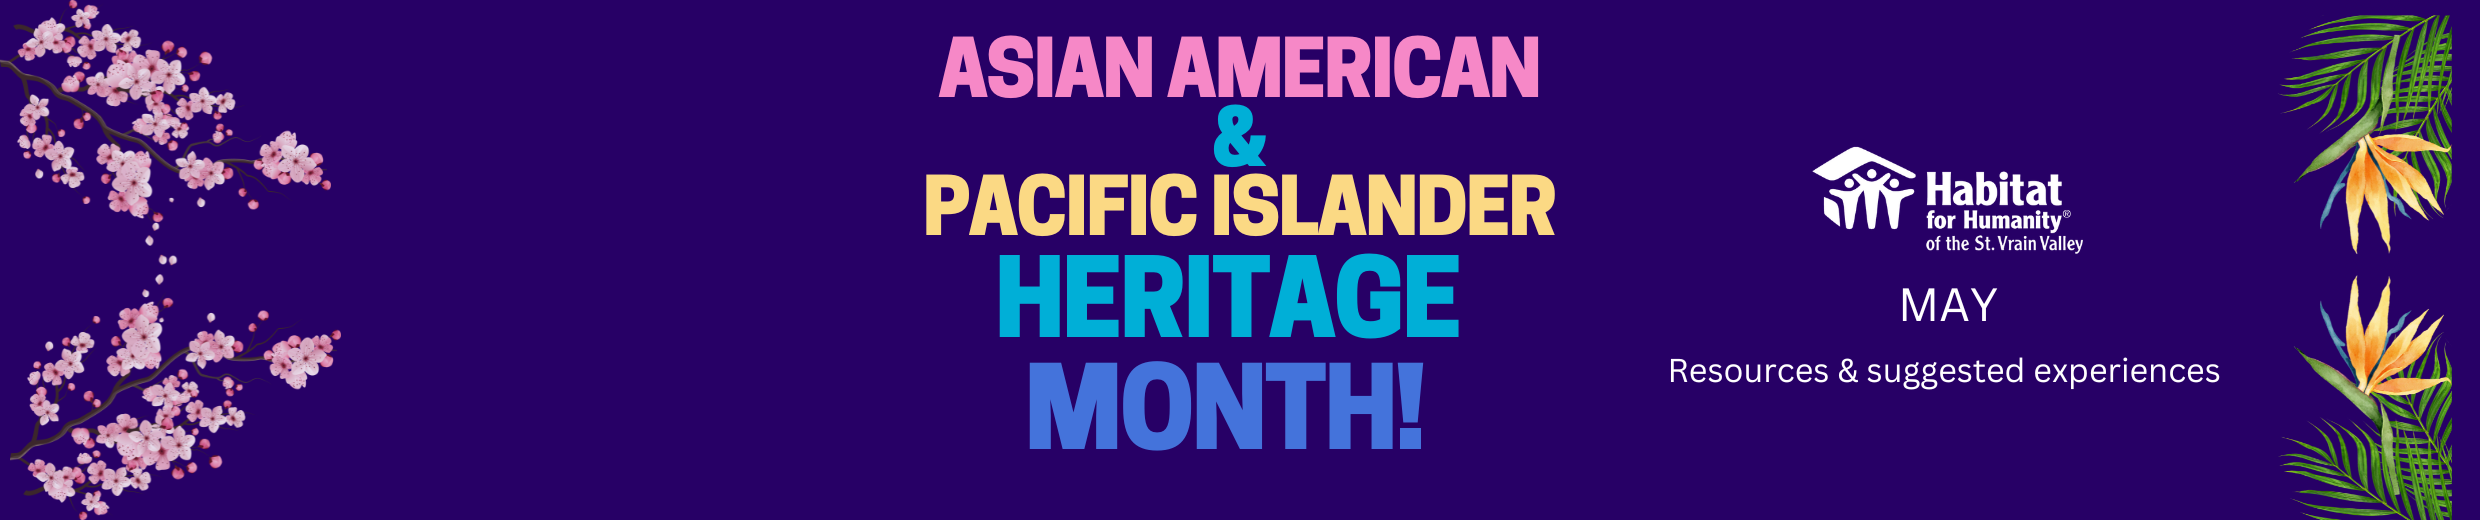 homepage banner AAPI.png